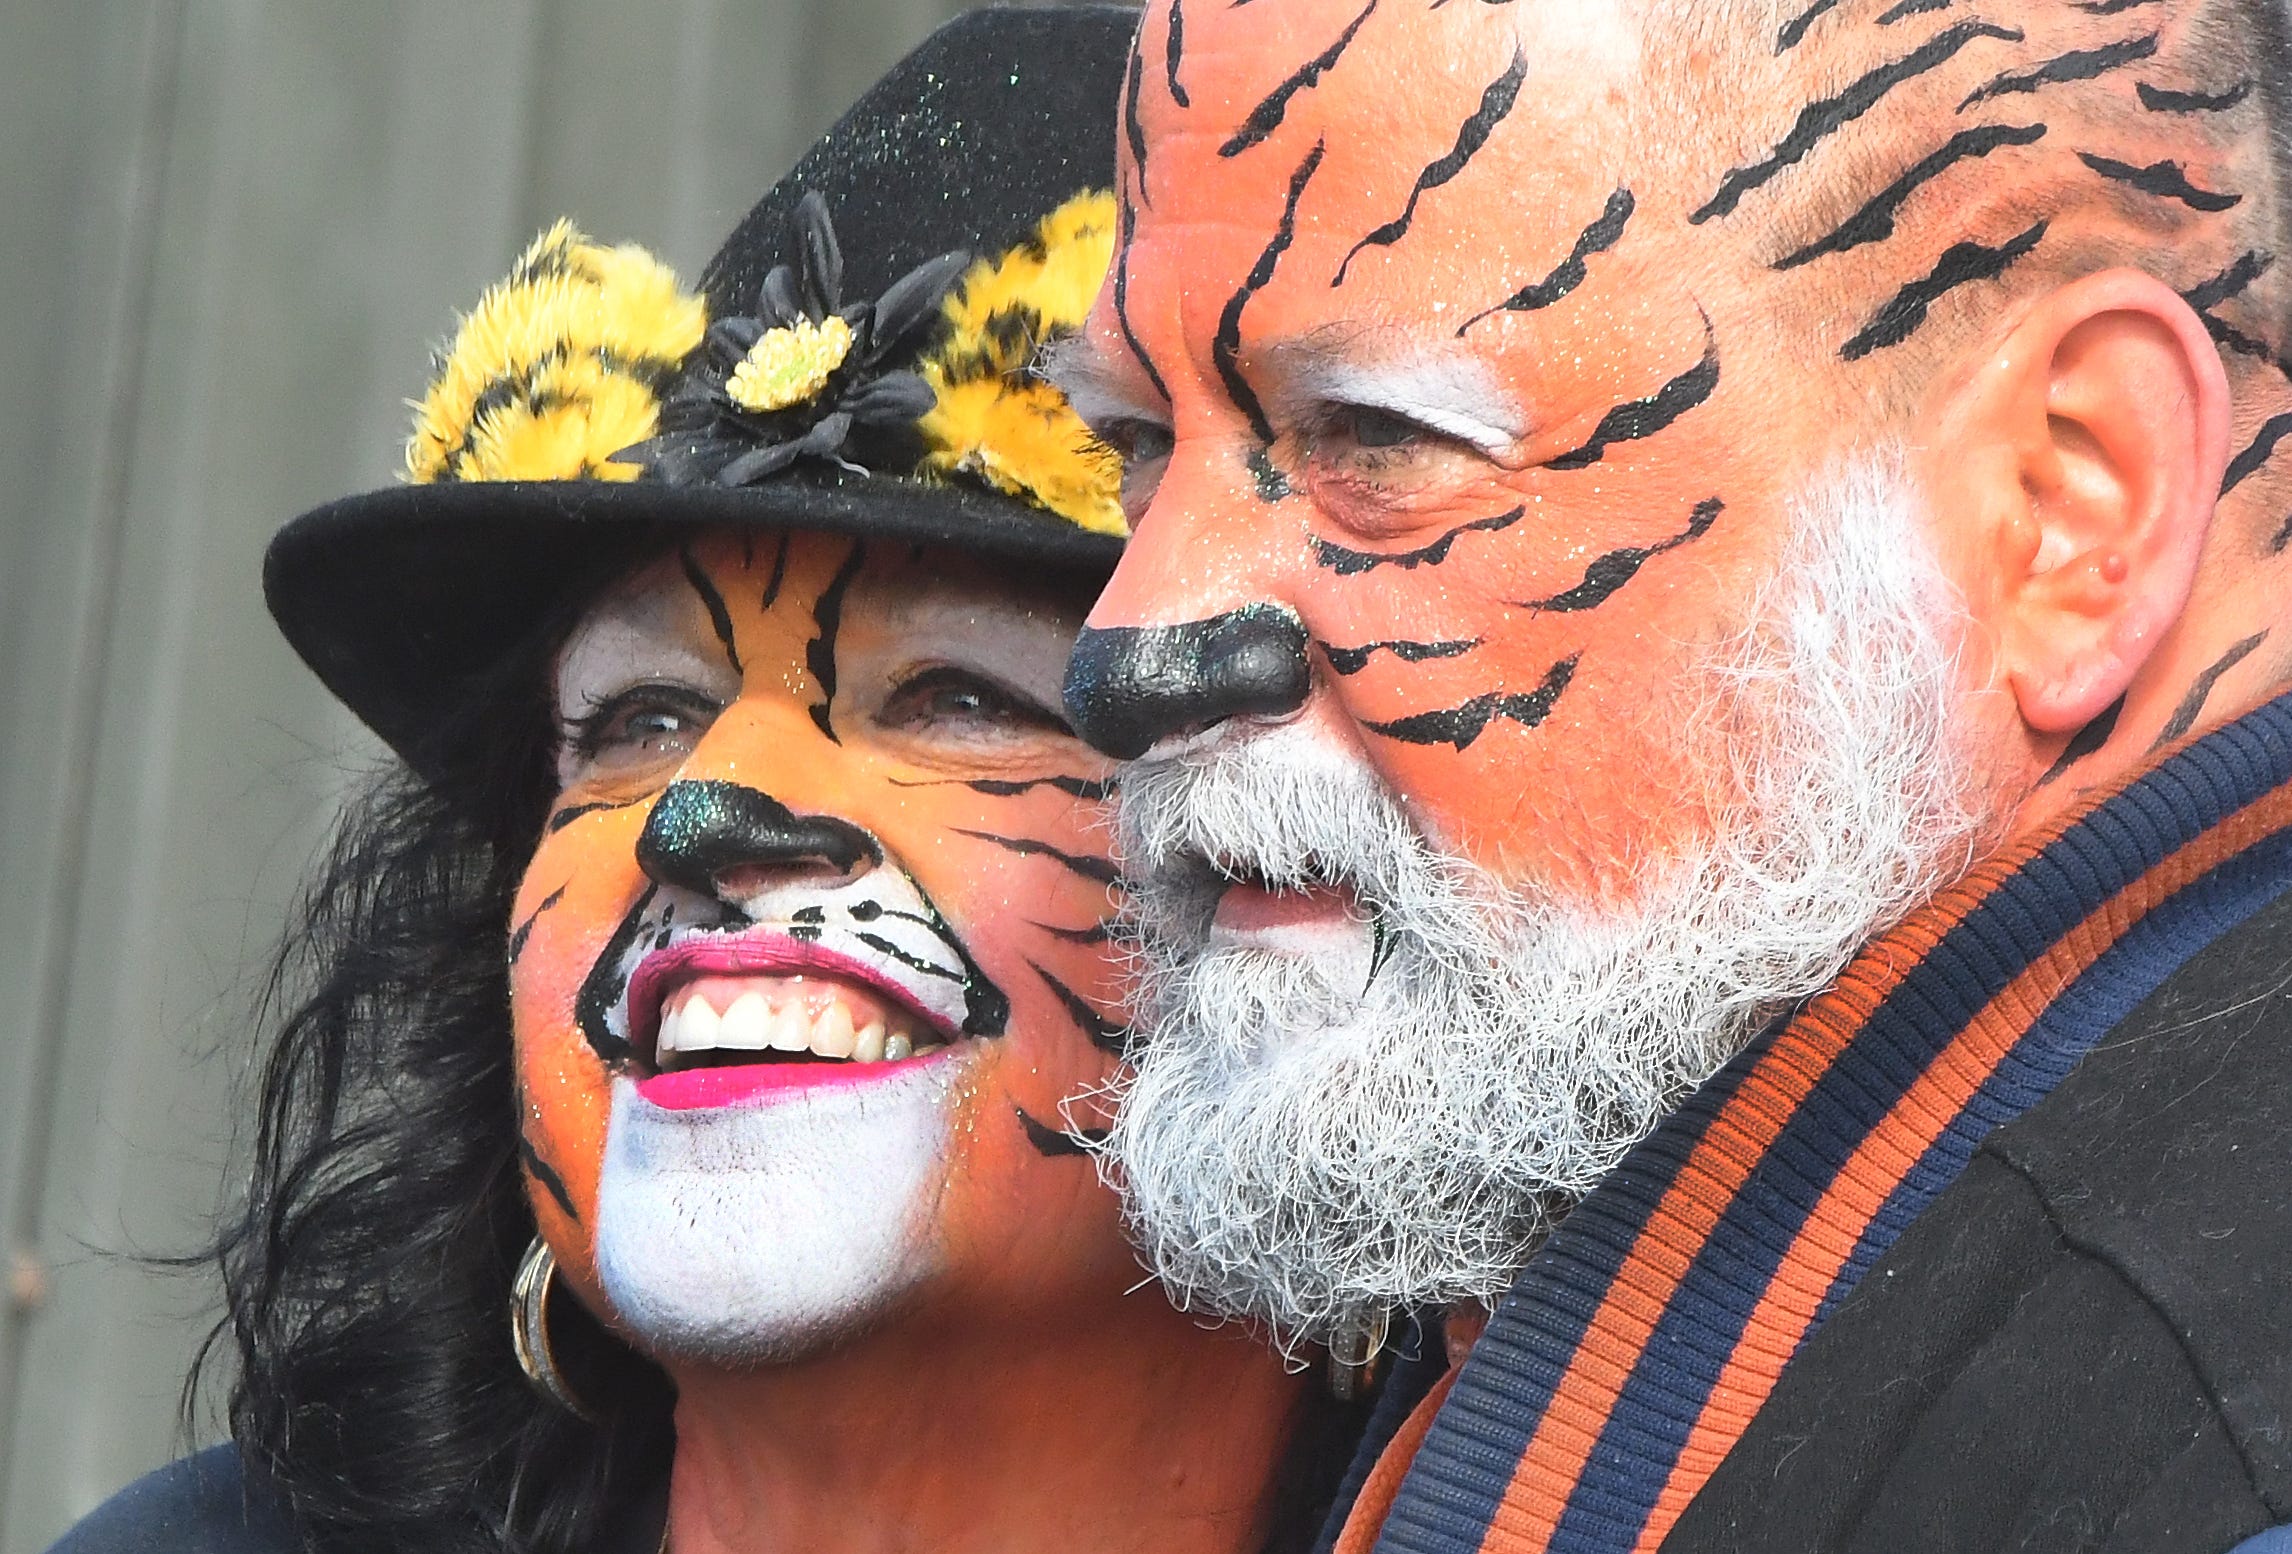 It wouldn't be an opening day without Pam and Tony Rinna of Southgate in their usual full faceprint before the first pitch on Opening Day. MLB Detroit Tigers opening day against the Boston Red Sox at Comerica Park in Detroit, Michigan on April 7, 2017.